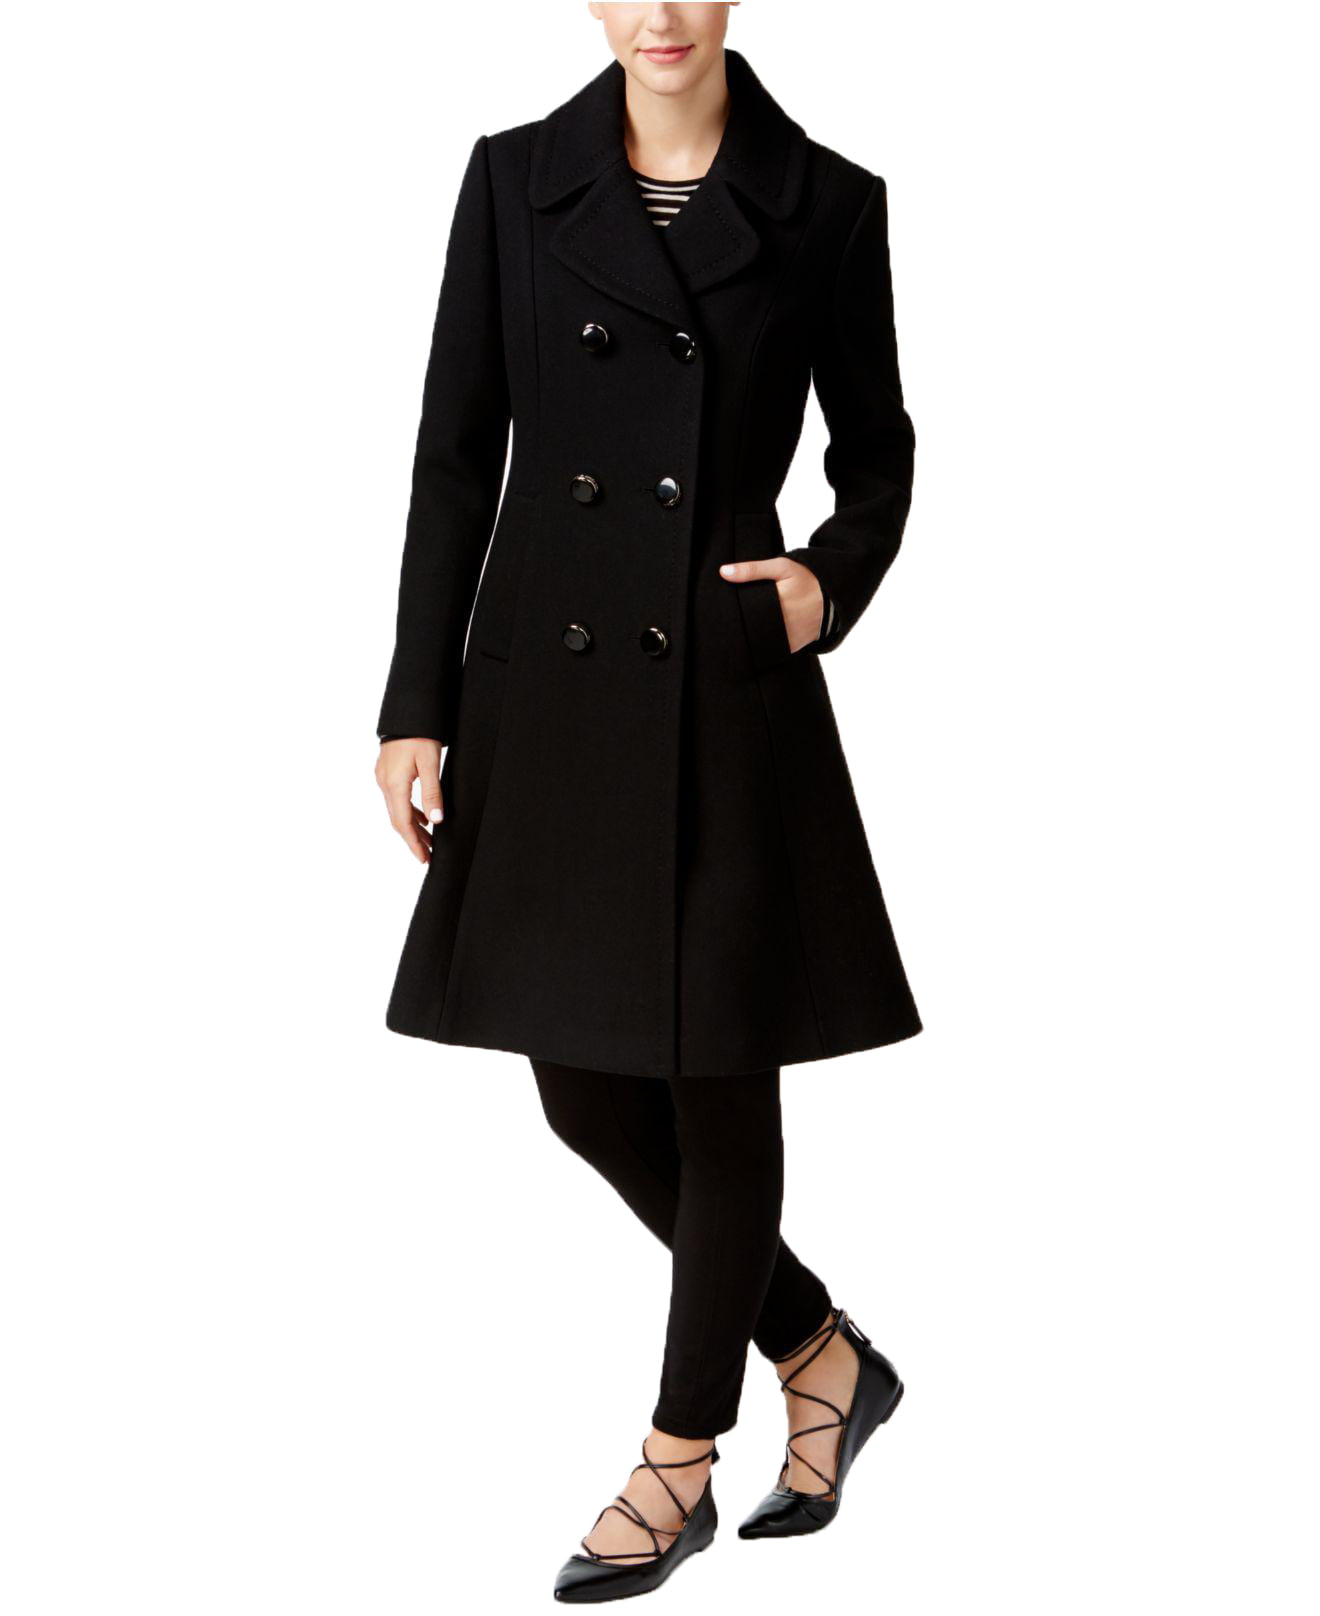 Kate Spade New York Womens Wool-Blend Double-Breasted Peacoat (Black,  X-Large) 